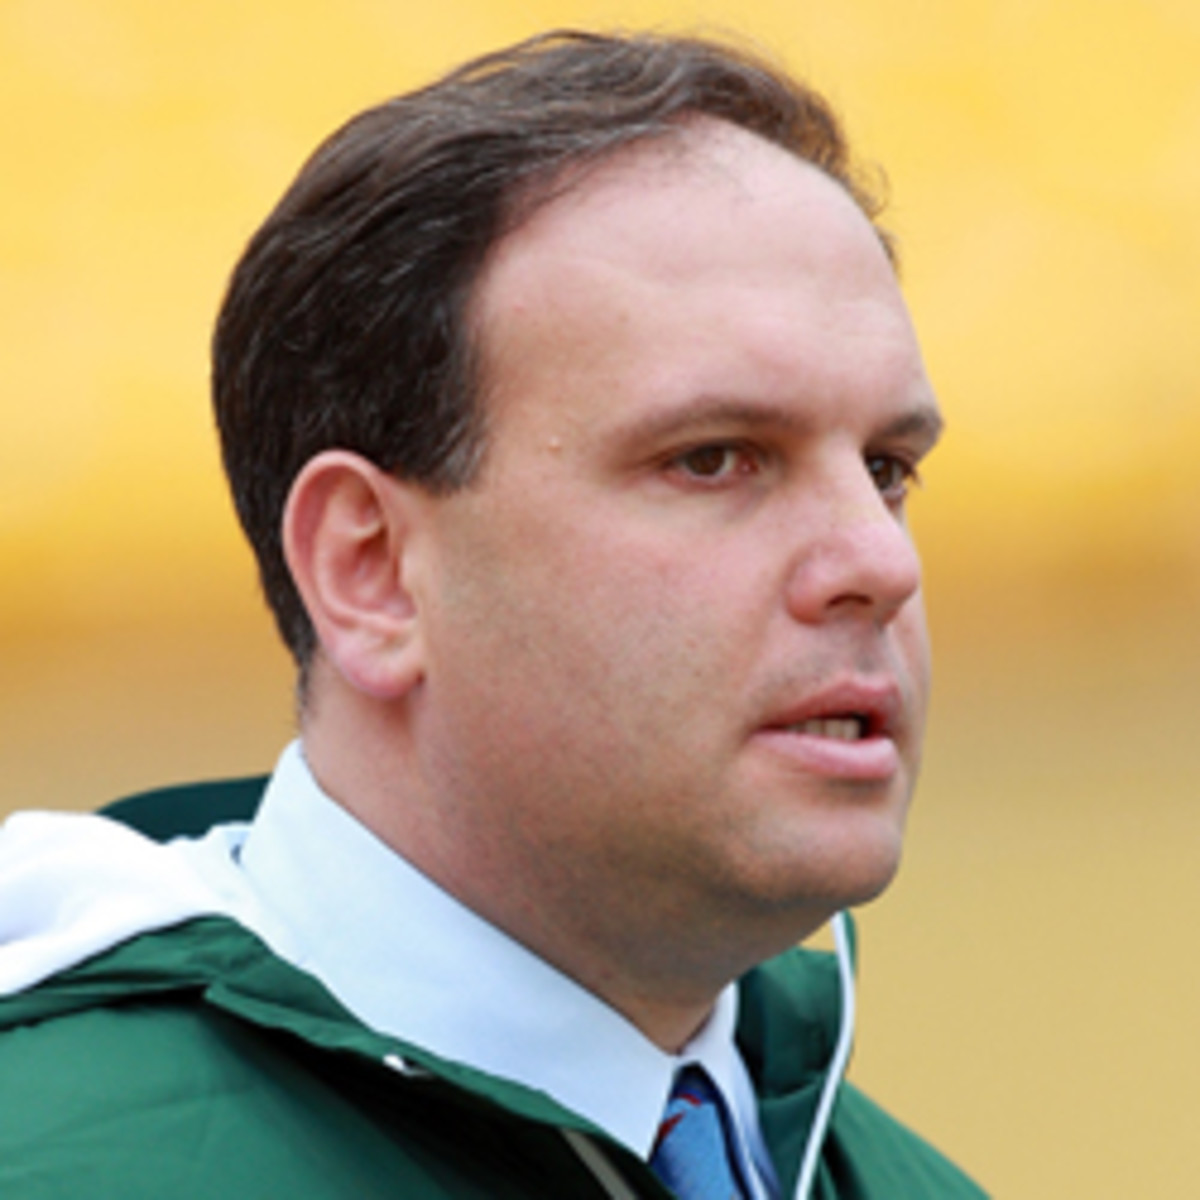 The Jets have made the playoffs in just three of Mike Tannenbaum's seven seasons as general manager. (Karl Walter/Getty Images)